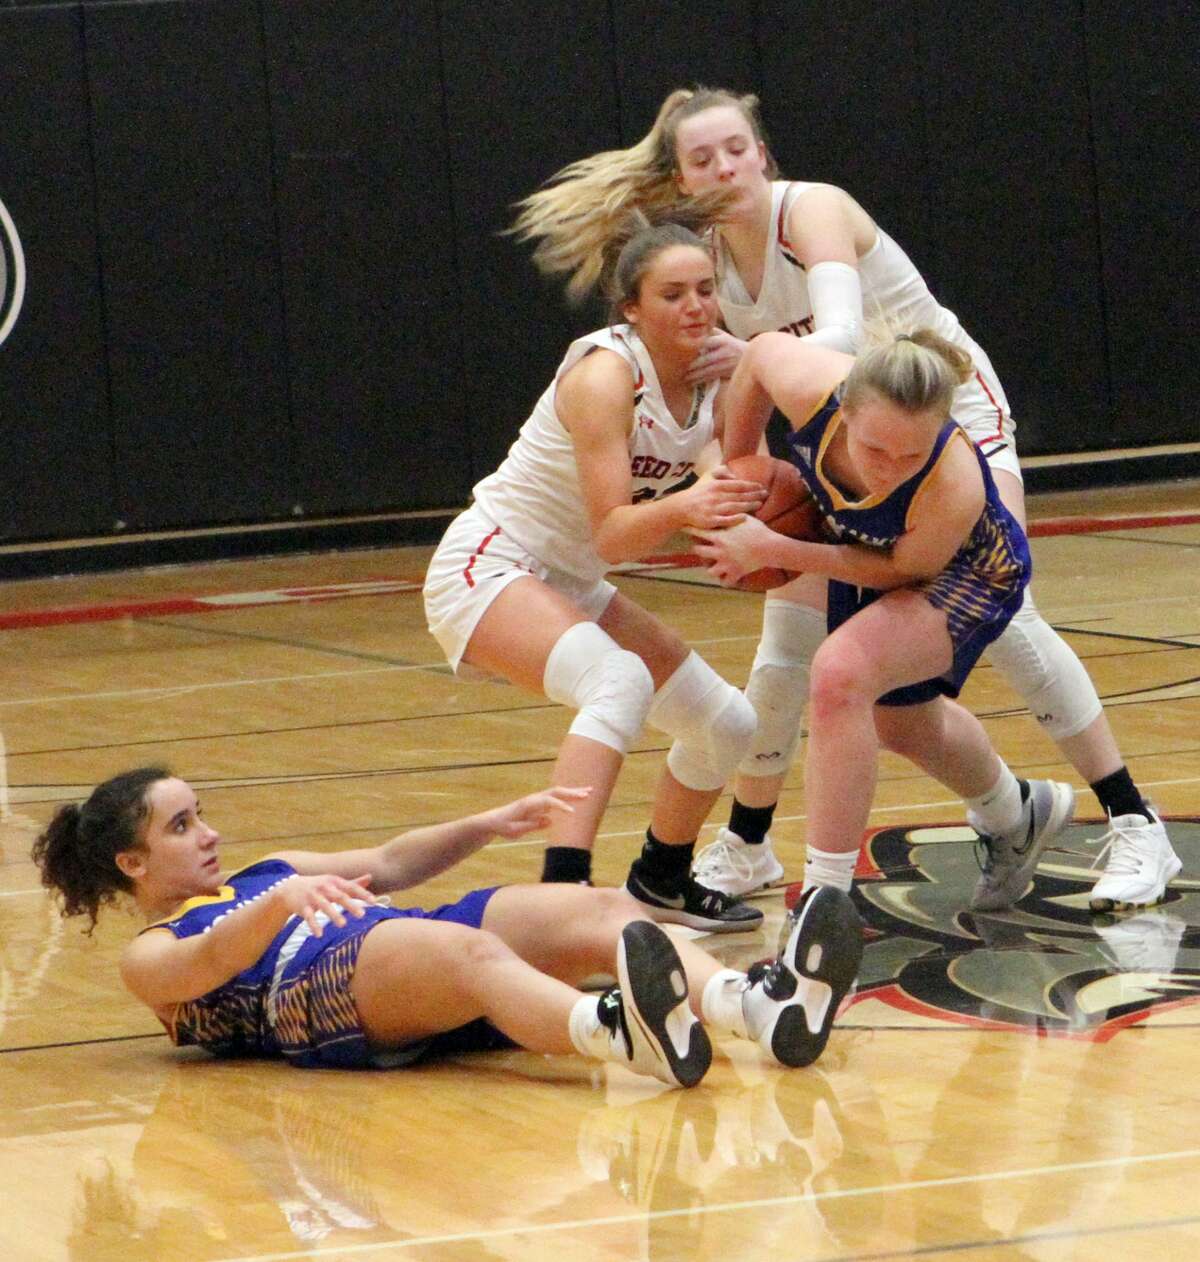 On Tuesday night, the Morley Stanwood girls basketball team defeated Reed City 43-25.